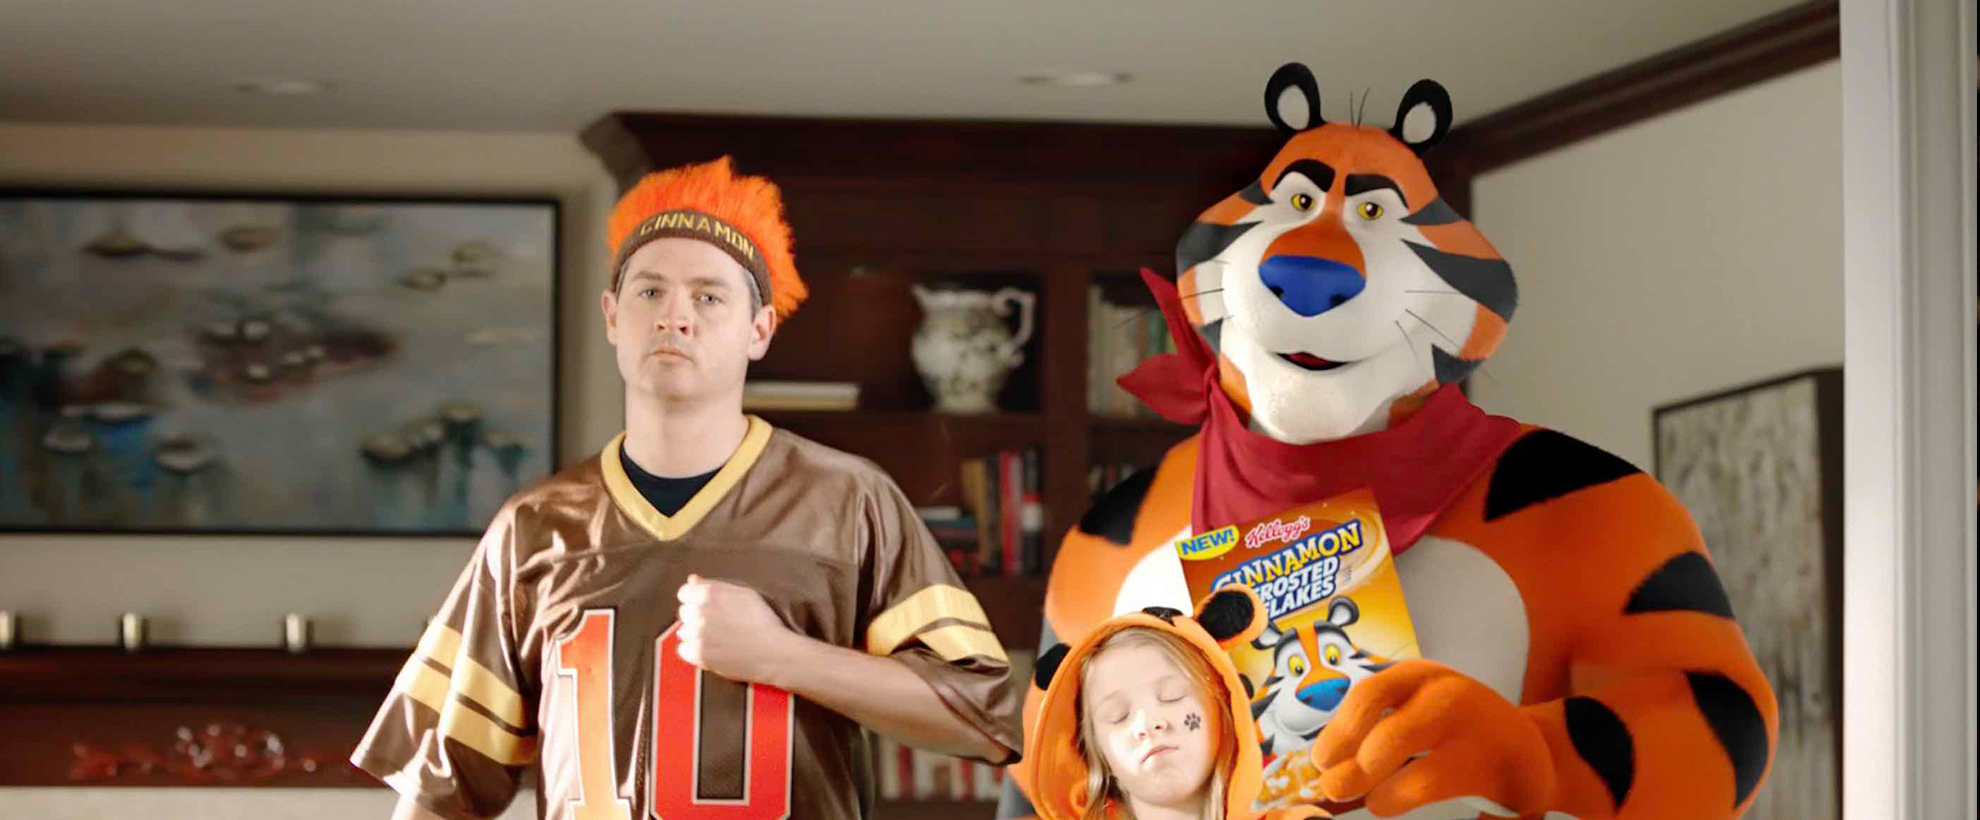 Tony the tiger holds a box of frosted flakes cereal and stands next to a young girl in a tiger hood and a man in a sports jersey